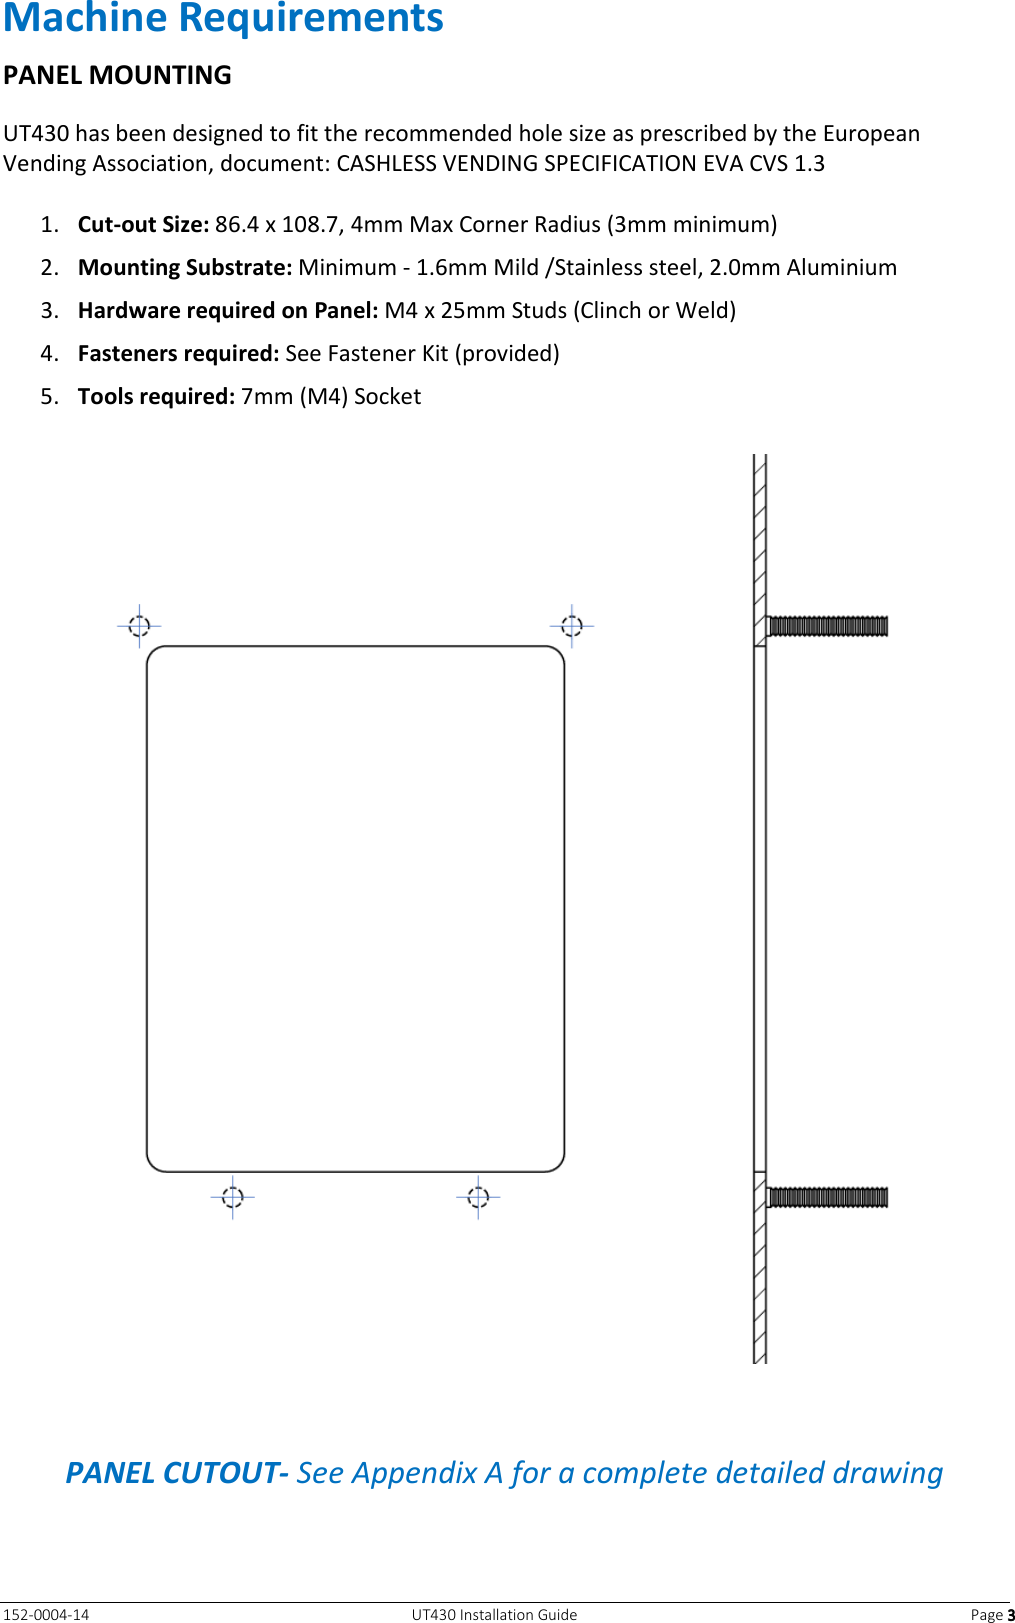   152-0004-14  UT430 Installation Guide  Page 3333 Machine Requirements PANEL MOUNTING UT430 has been designed to fit the recommended hole size as prescribed by the European Vending Association, document: CASHLESS VENDING SPECIFICATION EVA CVS 1.3  1. Cut-out Size: 86.4 x 108.7, 4mm Max Corner Radius (3mm minimum) 2. Mounting Substrate: Minimum - 1.6mm Mild /Stainless steel, 2.0mm Aluminium 3. Hardware required on Panel: M4 x 25mm Studs (Clinch or Weld) 4. Fasteners required: See Fastener Kit (provided) 5. Tools required: 7mm (M4) Socket    PANEL CUTOUT- See Appendix A for a complete detailed drawing 